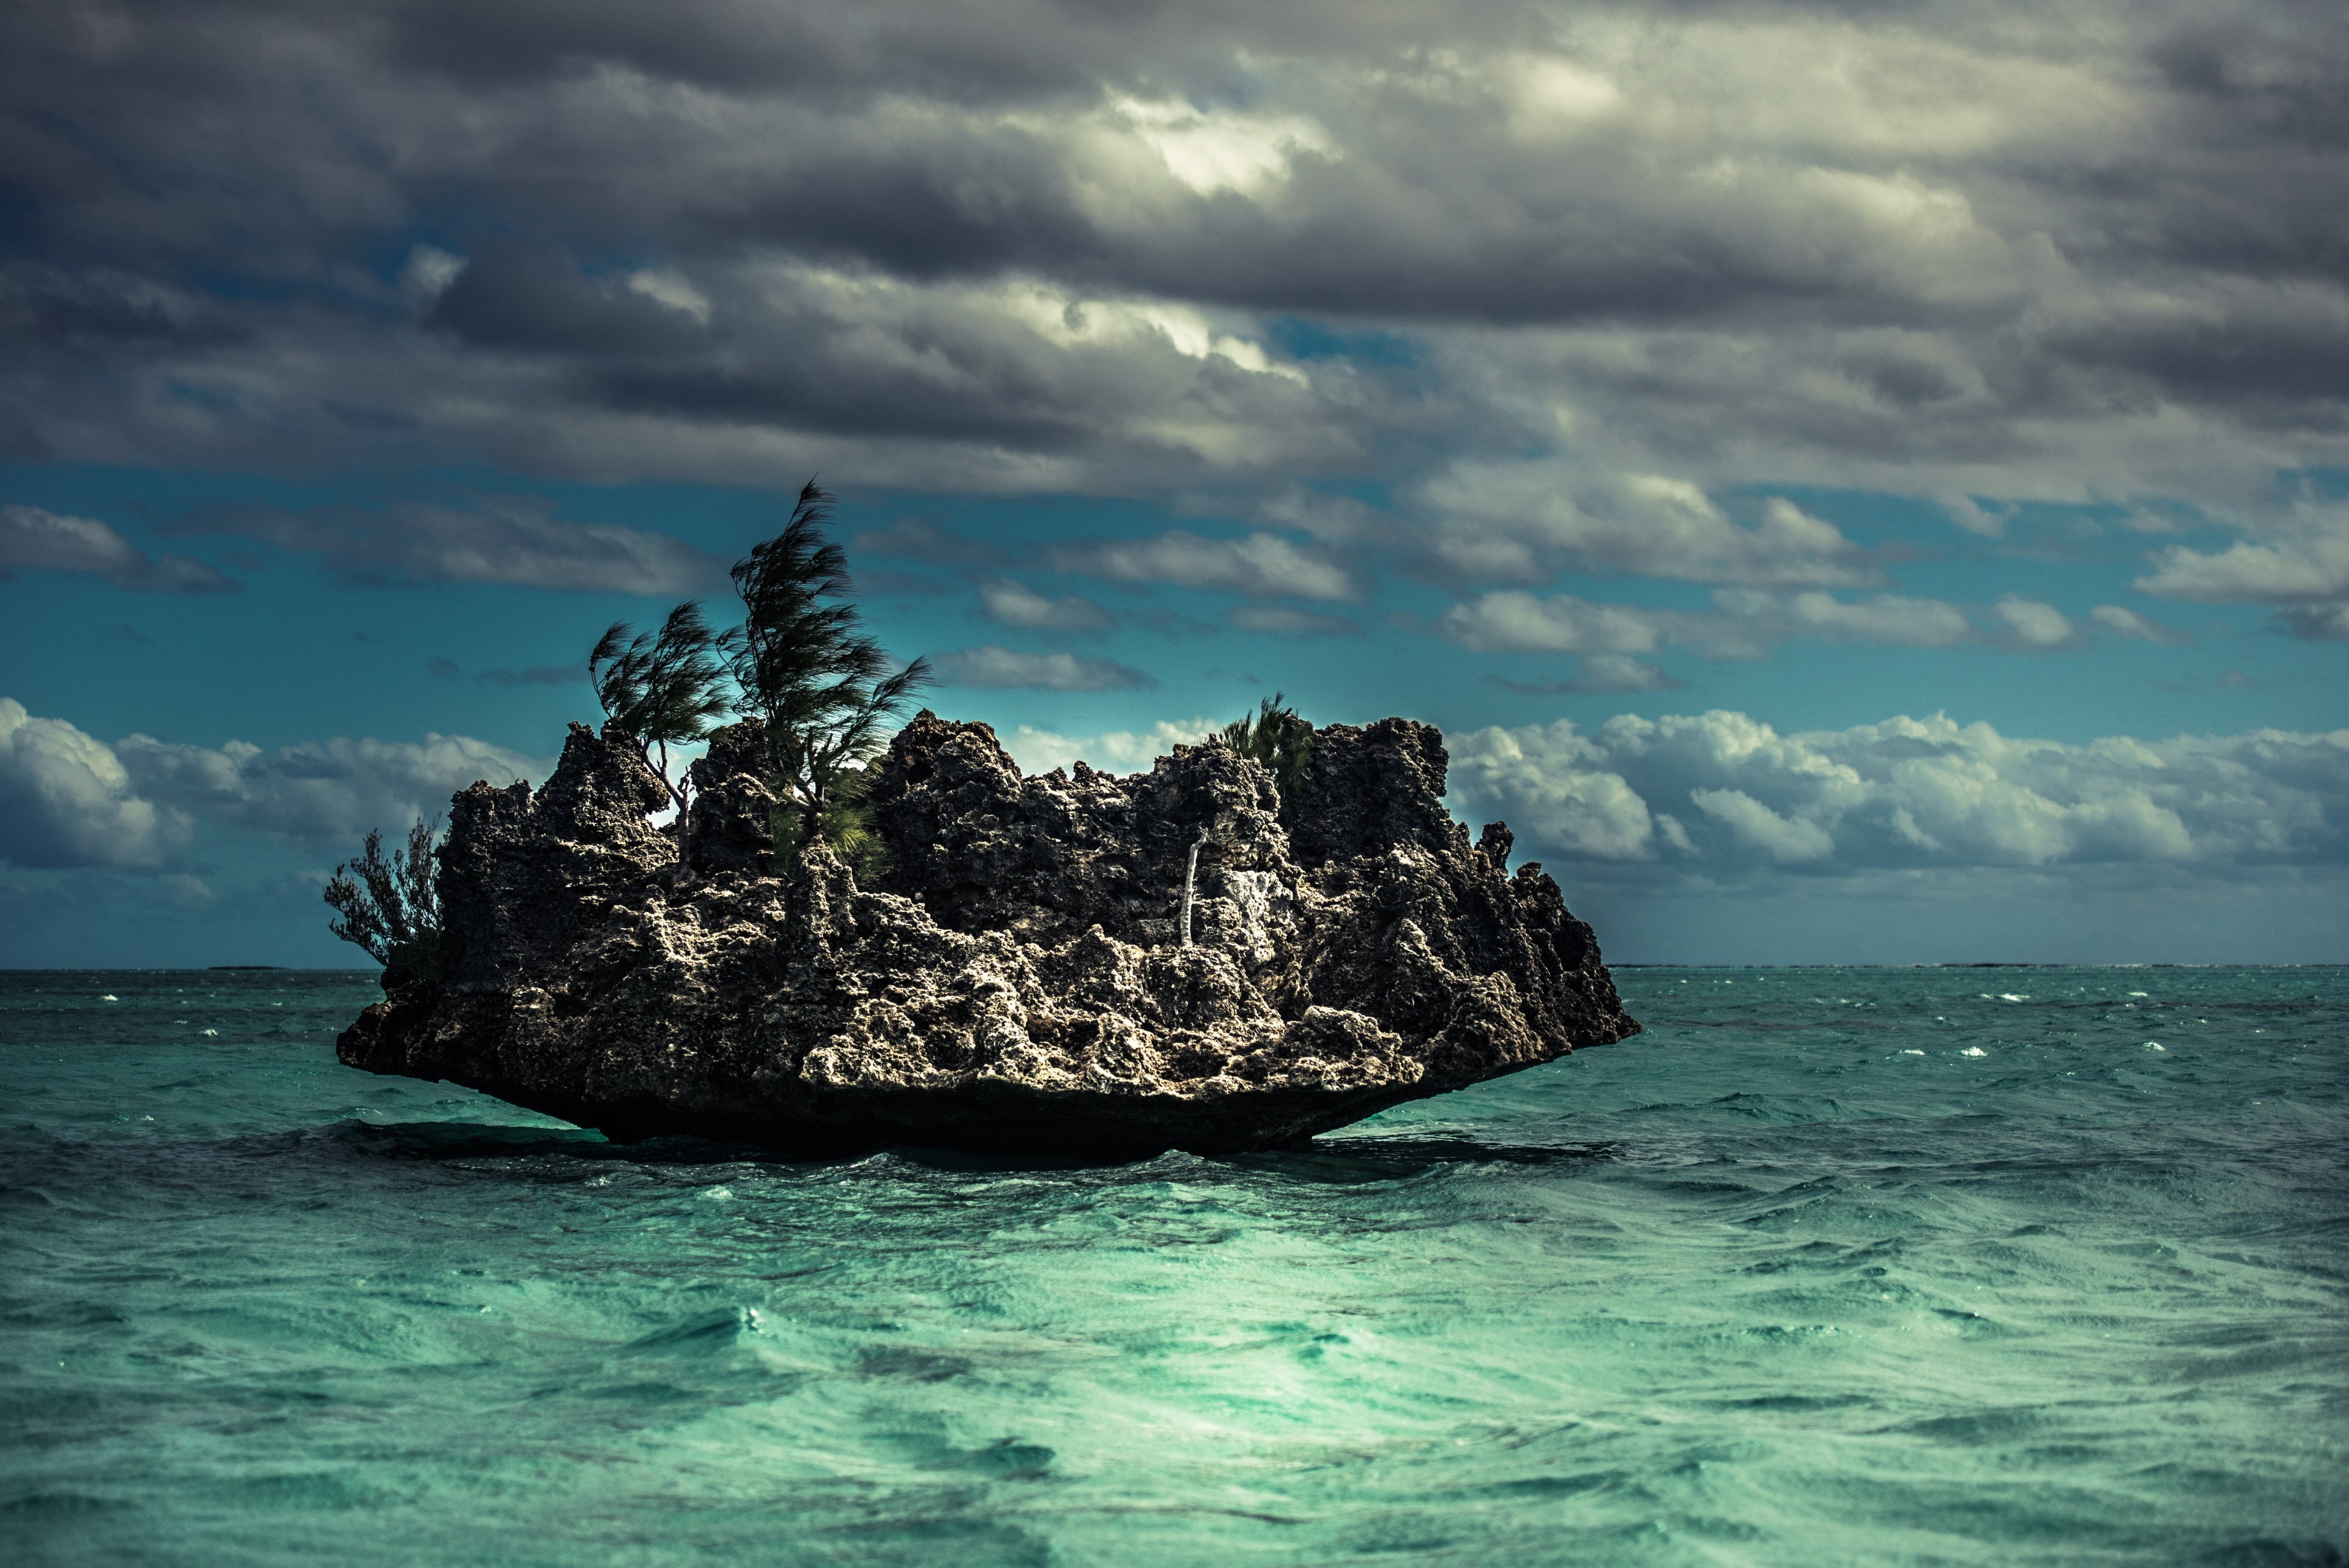 islet surrounded by body of water, nature, landscape, clouds